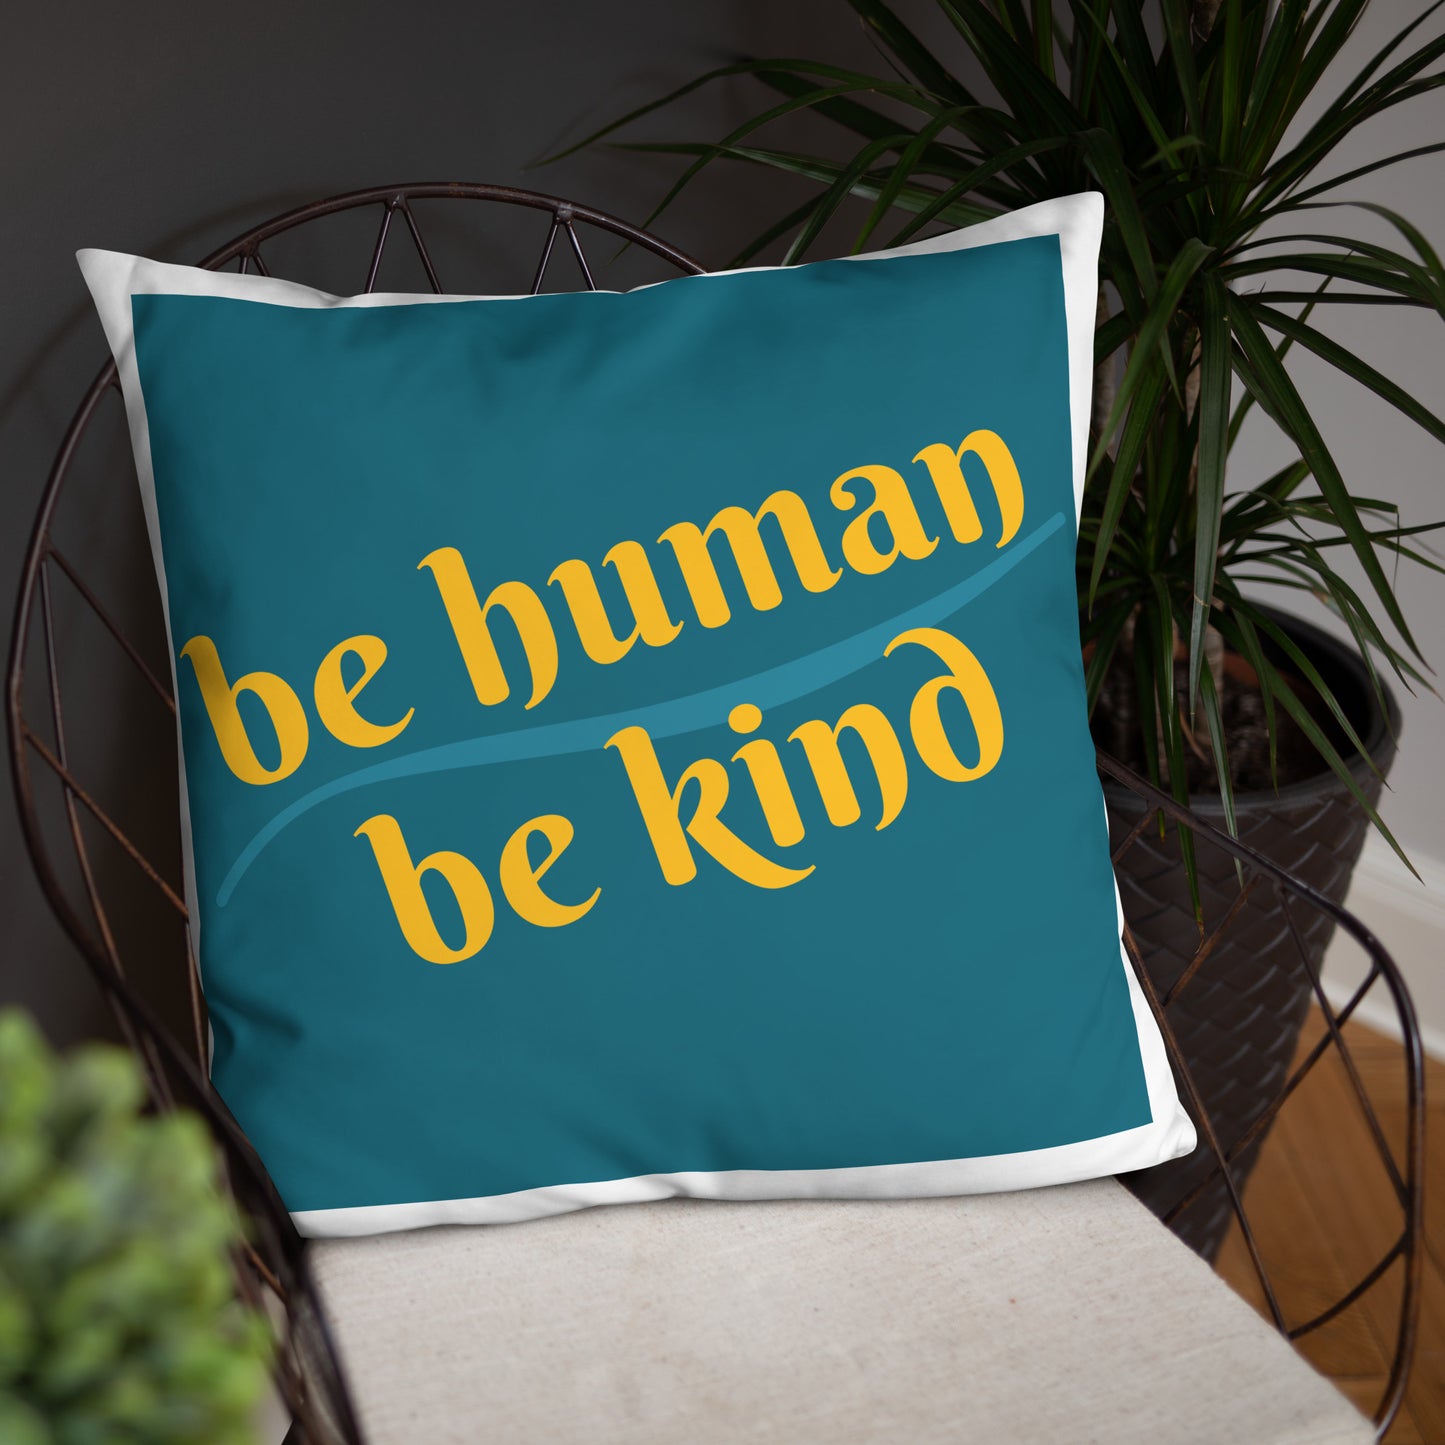 Be Humand; Be Kind Basic Pillow